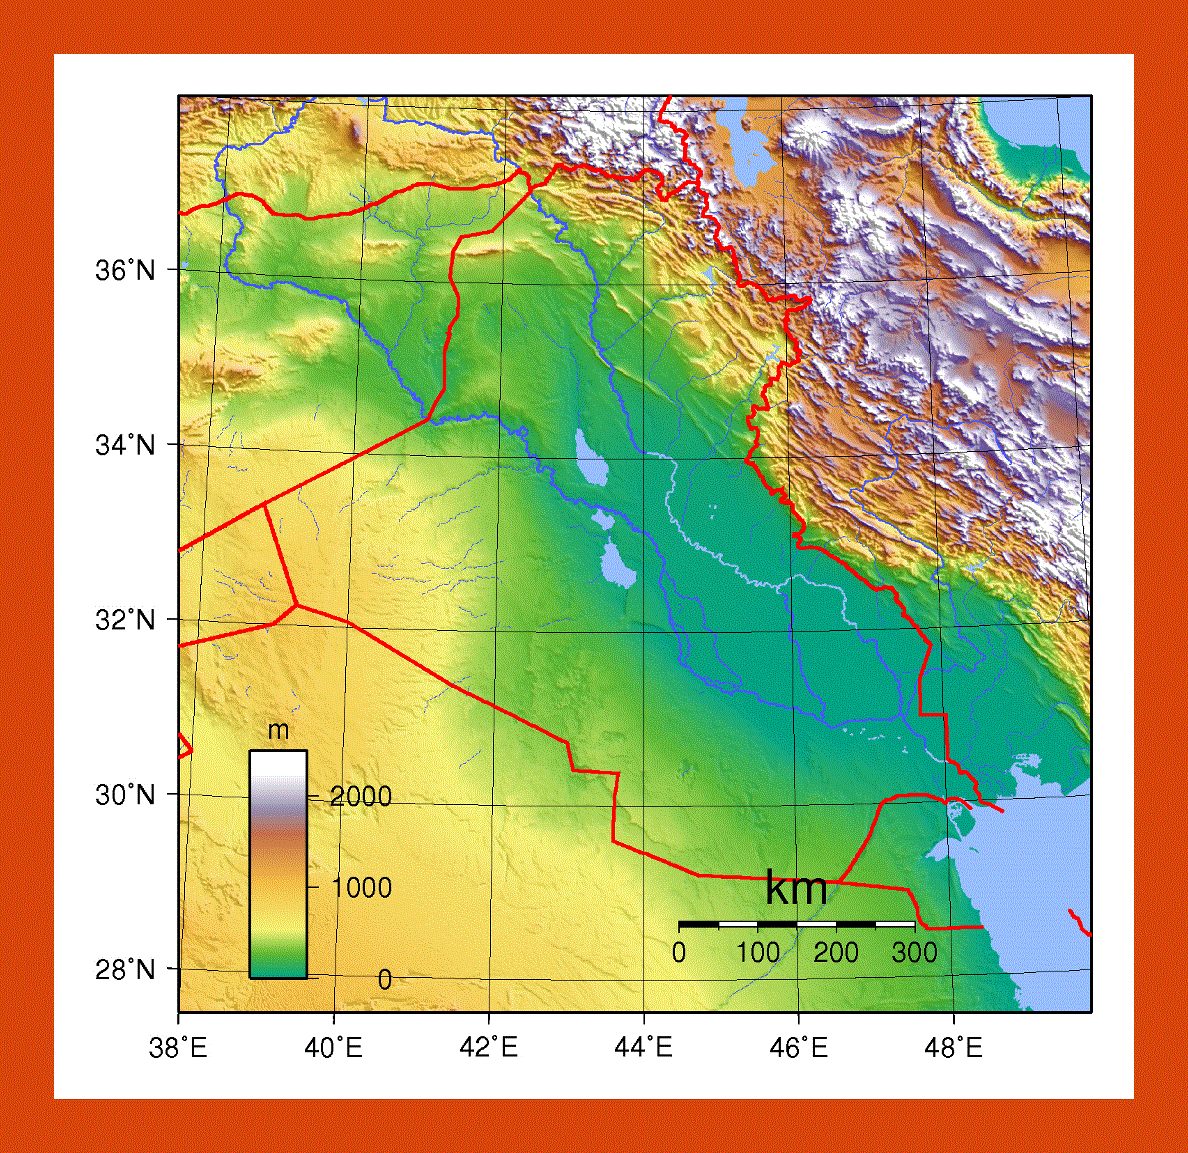 Topographical map of Iraq